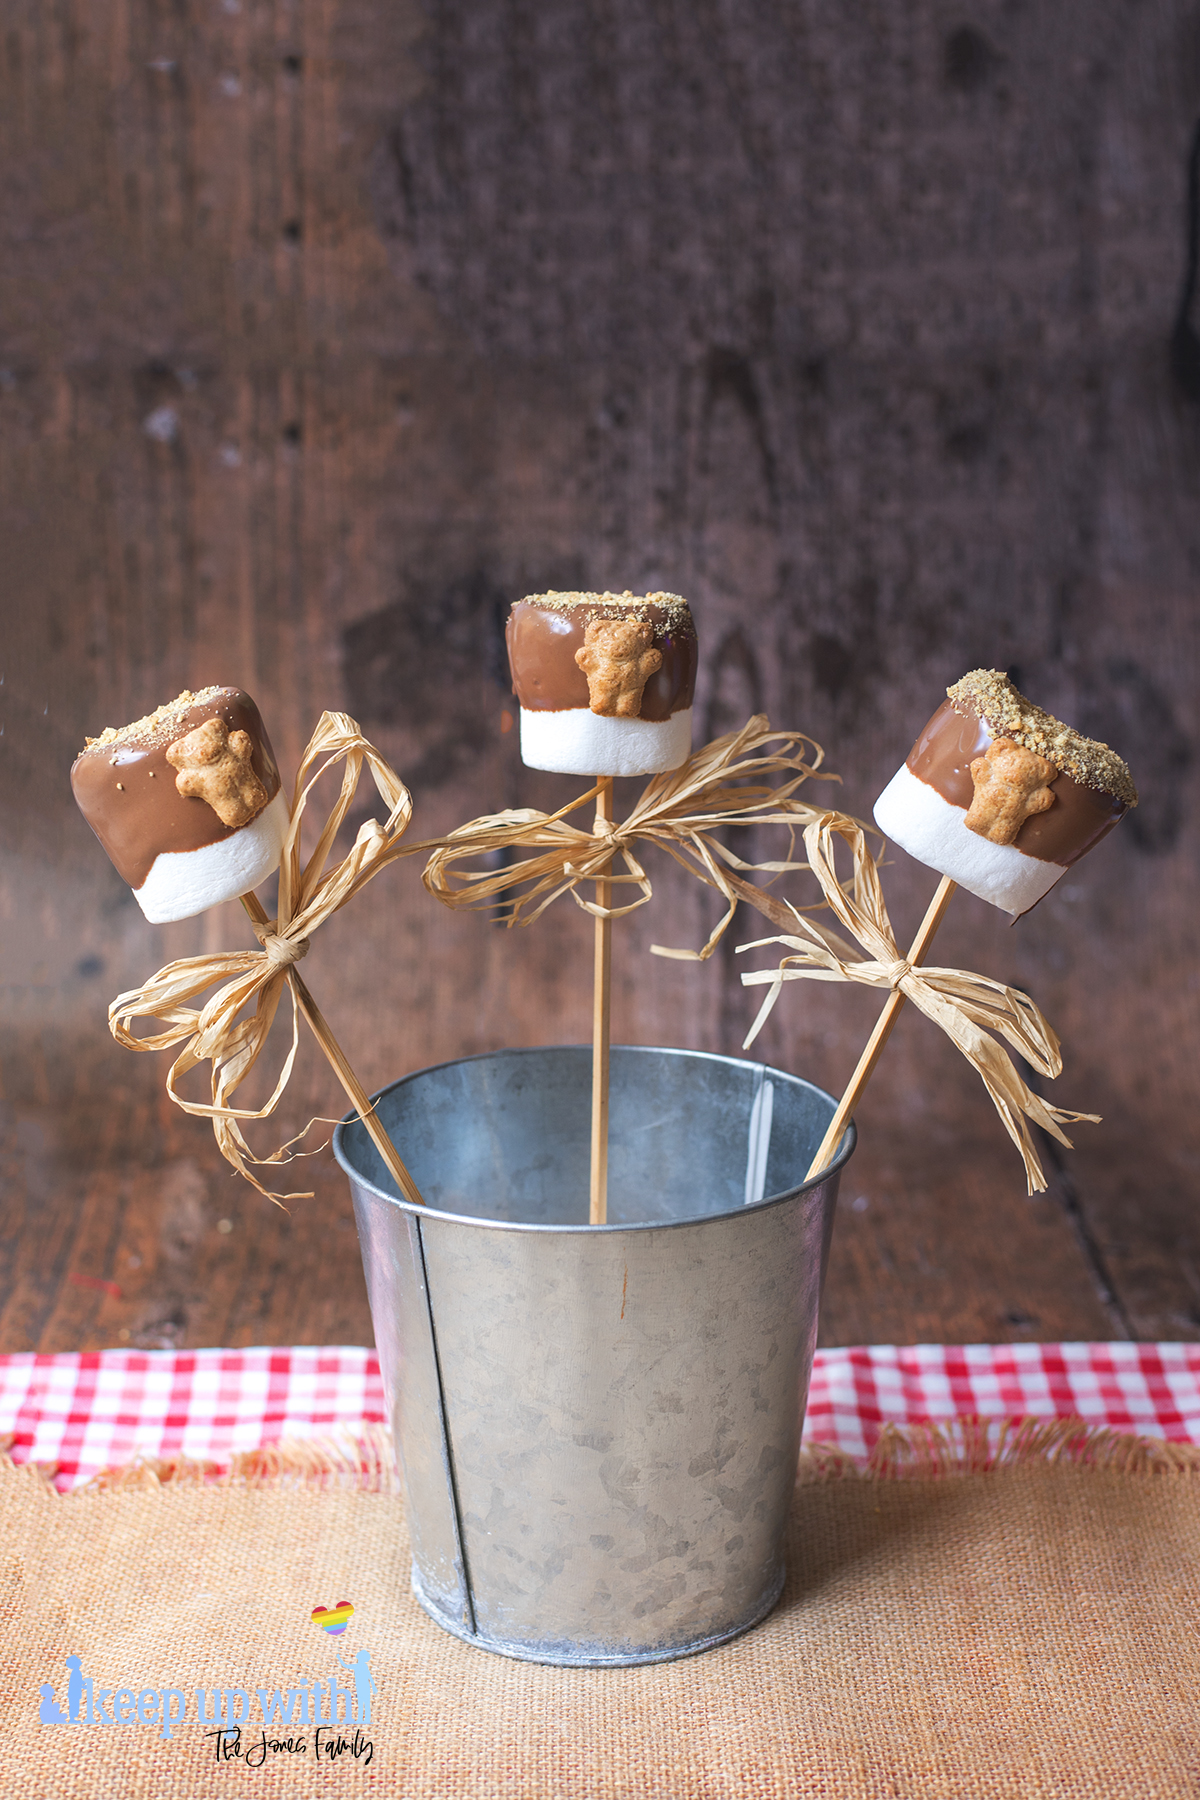 Image shows three teddy bear s'mores pops in a tin bucket on a dark wooden tabletop. Image by keep up with the jones family.